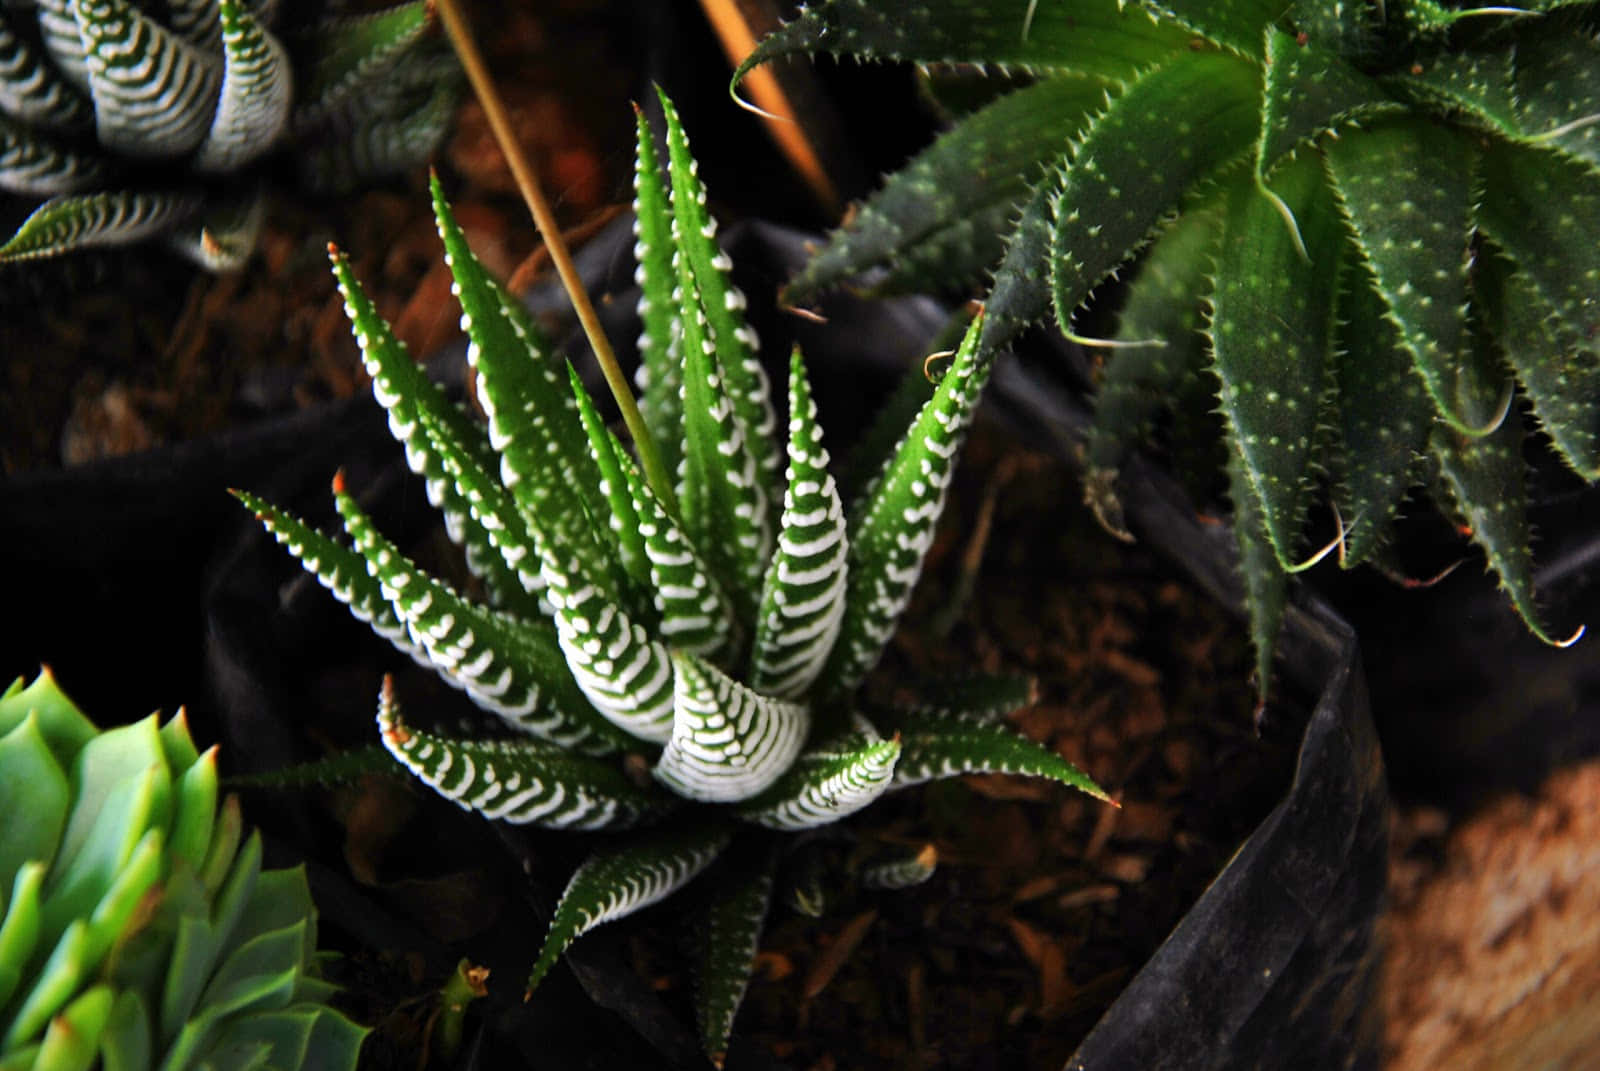 A Plant With White And Black Stripes